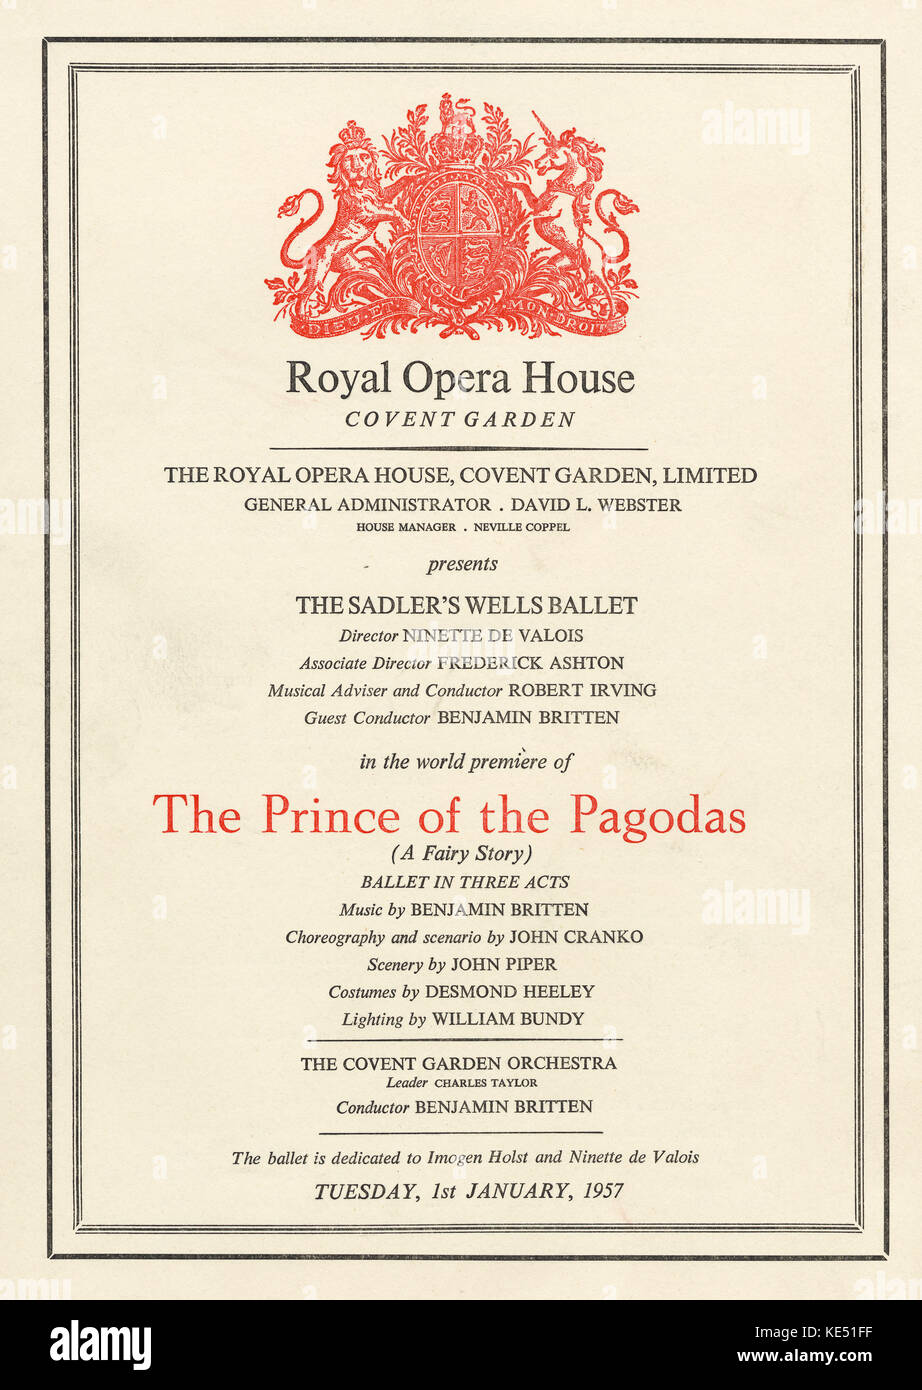 Benjamin Britten 's ballet 'The Prince of the Pagodas' Programe cover for performance by The Sadler 's Wells Ballet at the  Royal Opera House, Covent Garden, with Benjamin Britten conducting The Covent Garden Orchestra.  Tuesday, 1 January, 1957.  Ballet dedicated to Imogen Holst and Ninette de Valois Stock Photo